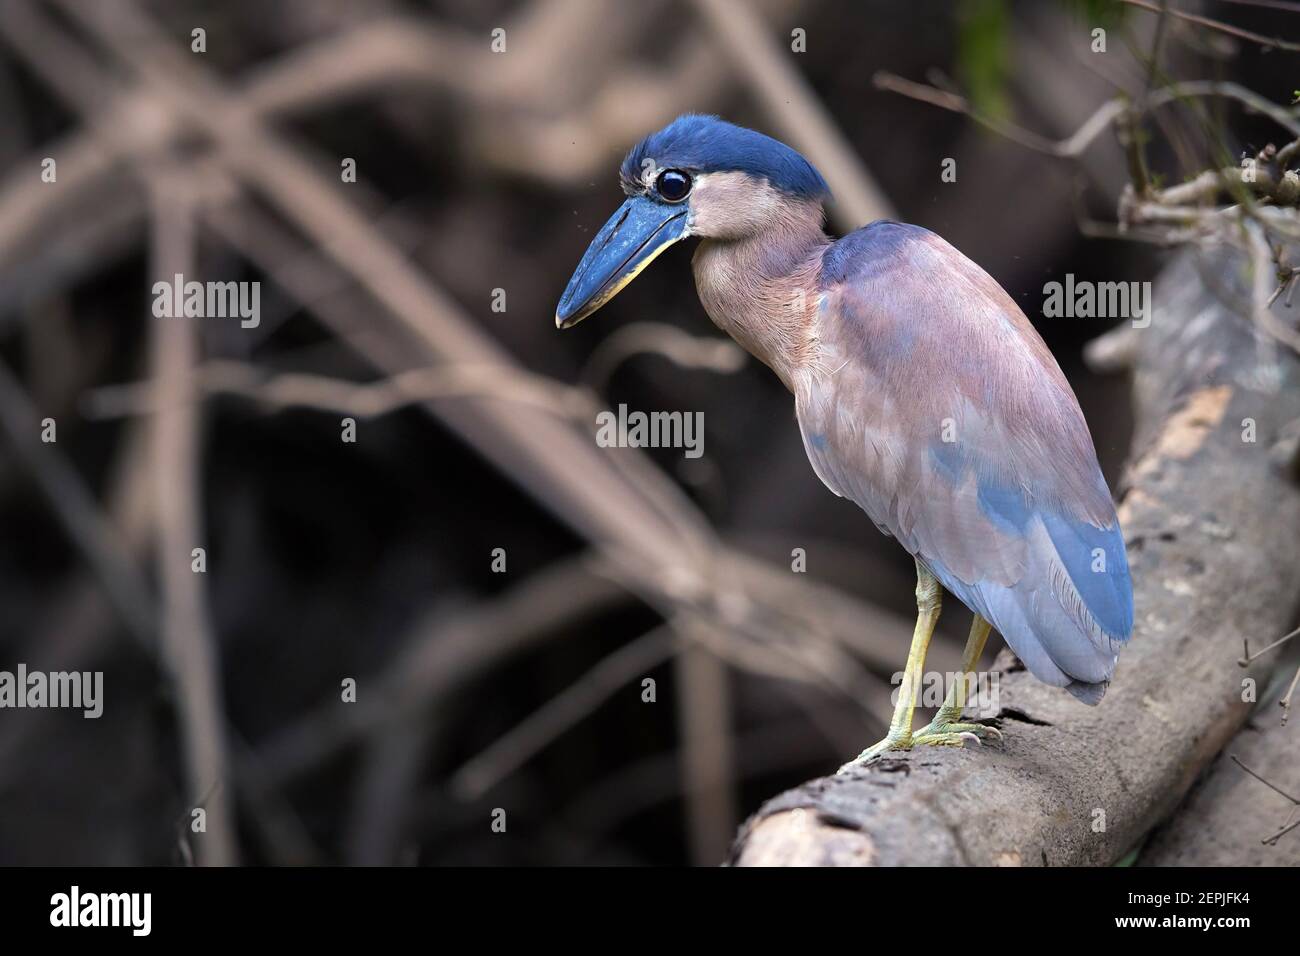 Boat-billed heron, Cochlearius cochlearius, nocturnal bird from heron family standing on mangrove roots against muddy river bank. Nocturnal bird with Stock Photo